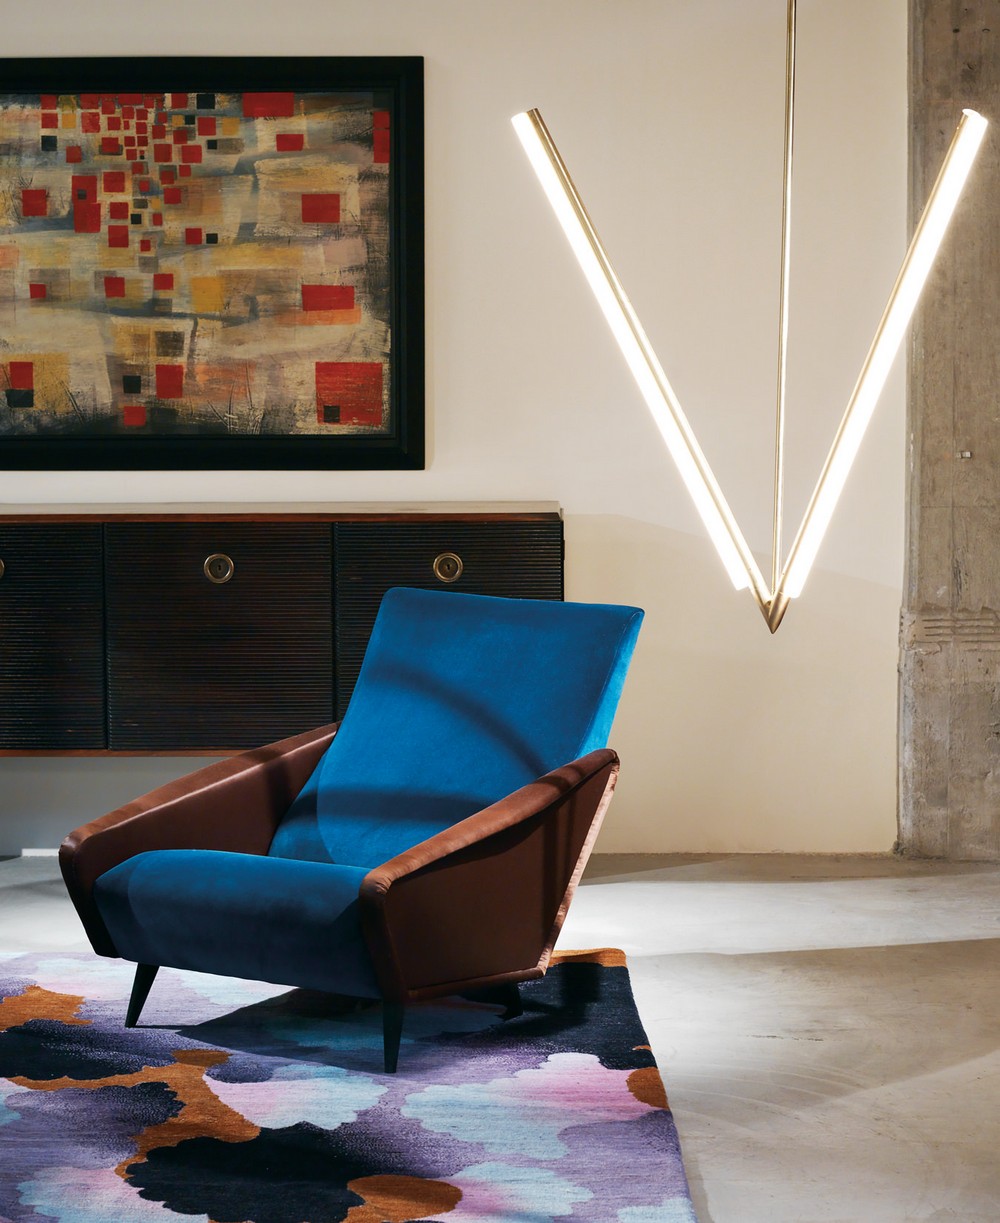 Culture, Art and Contemporary Design: Interiors by Nina Yashar